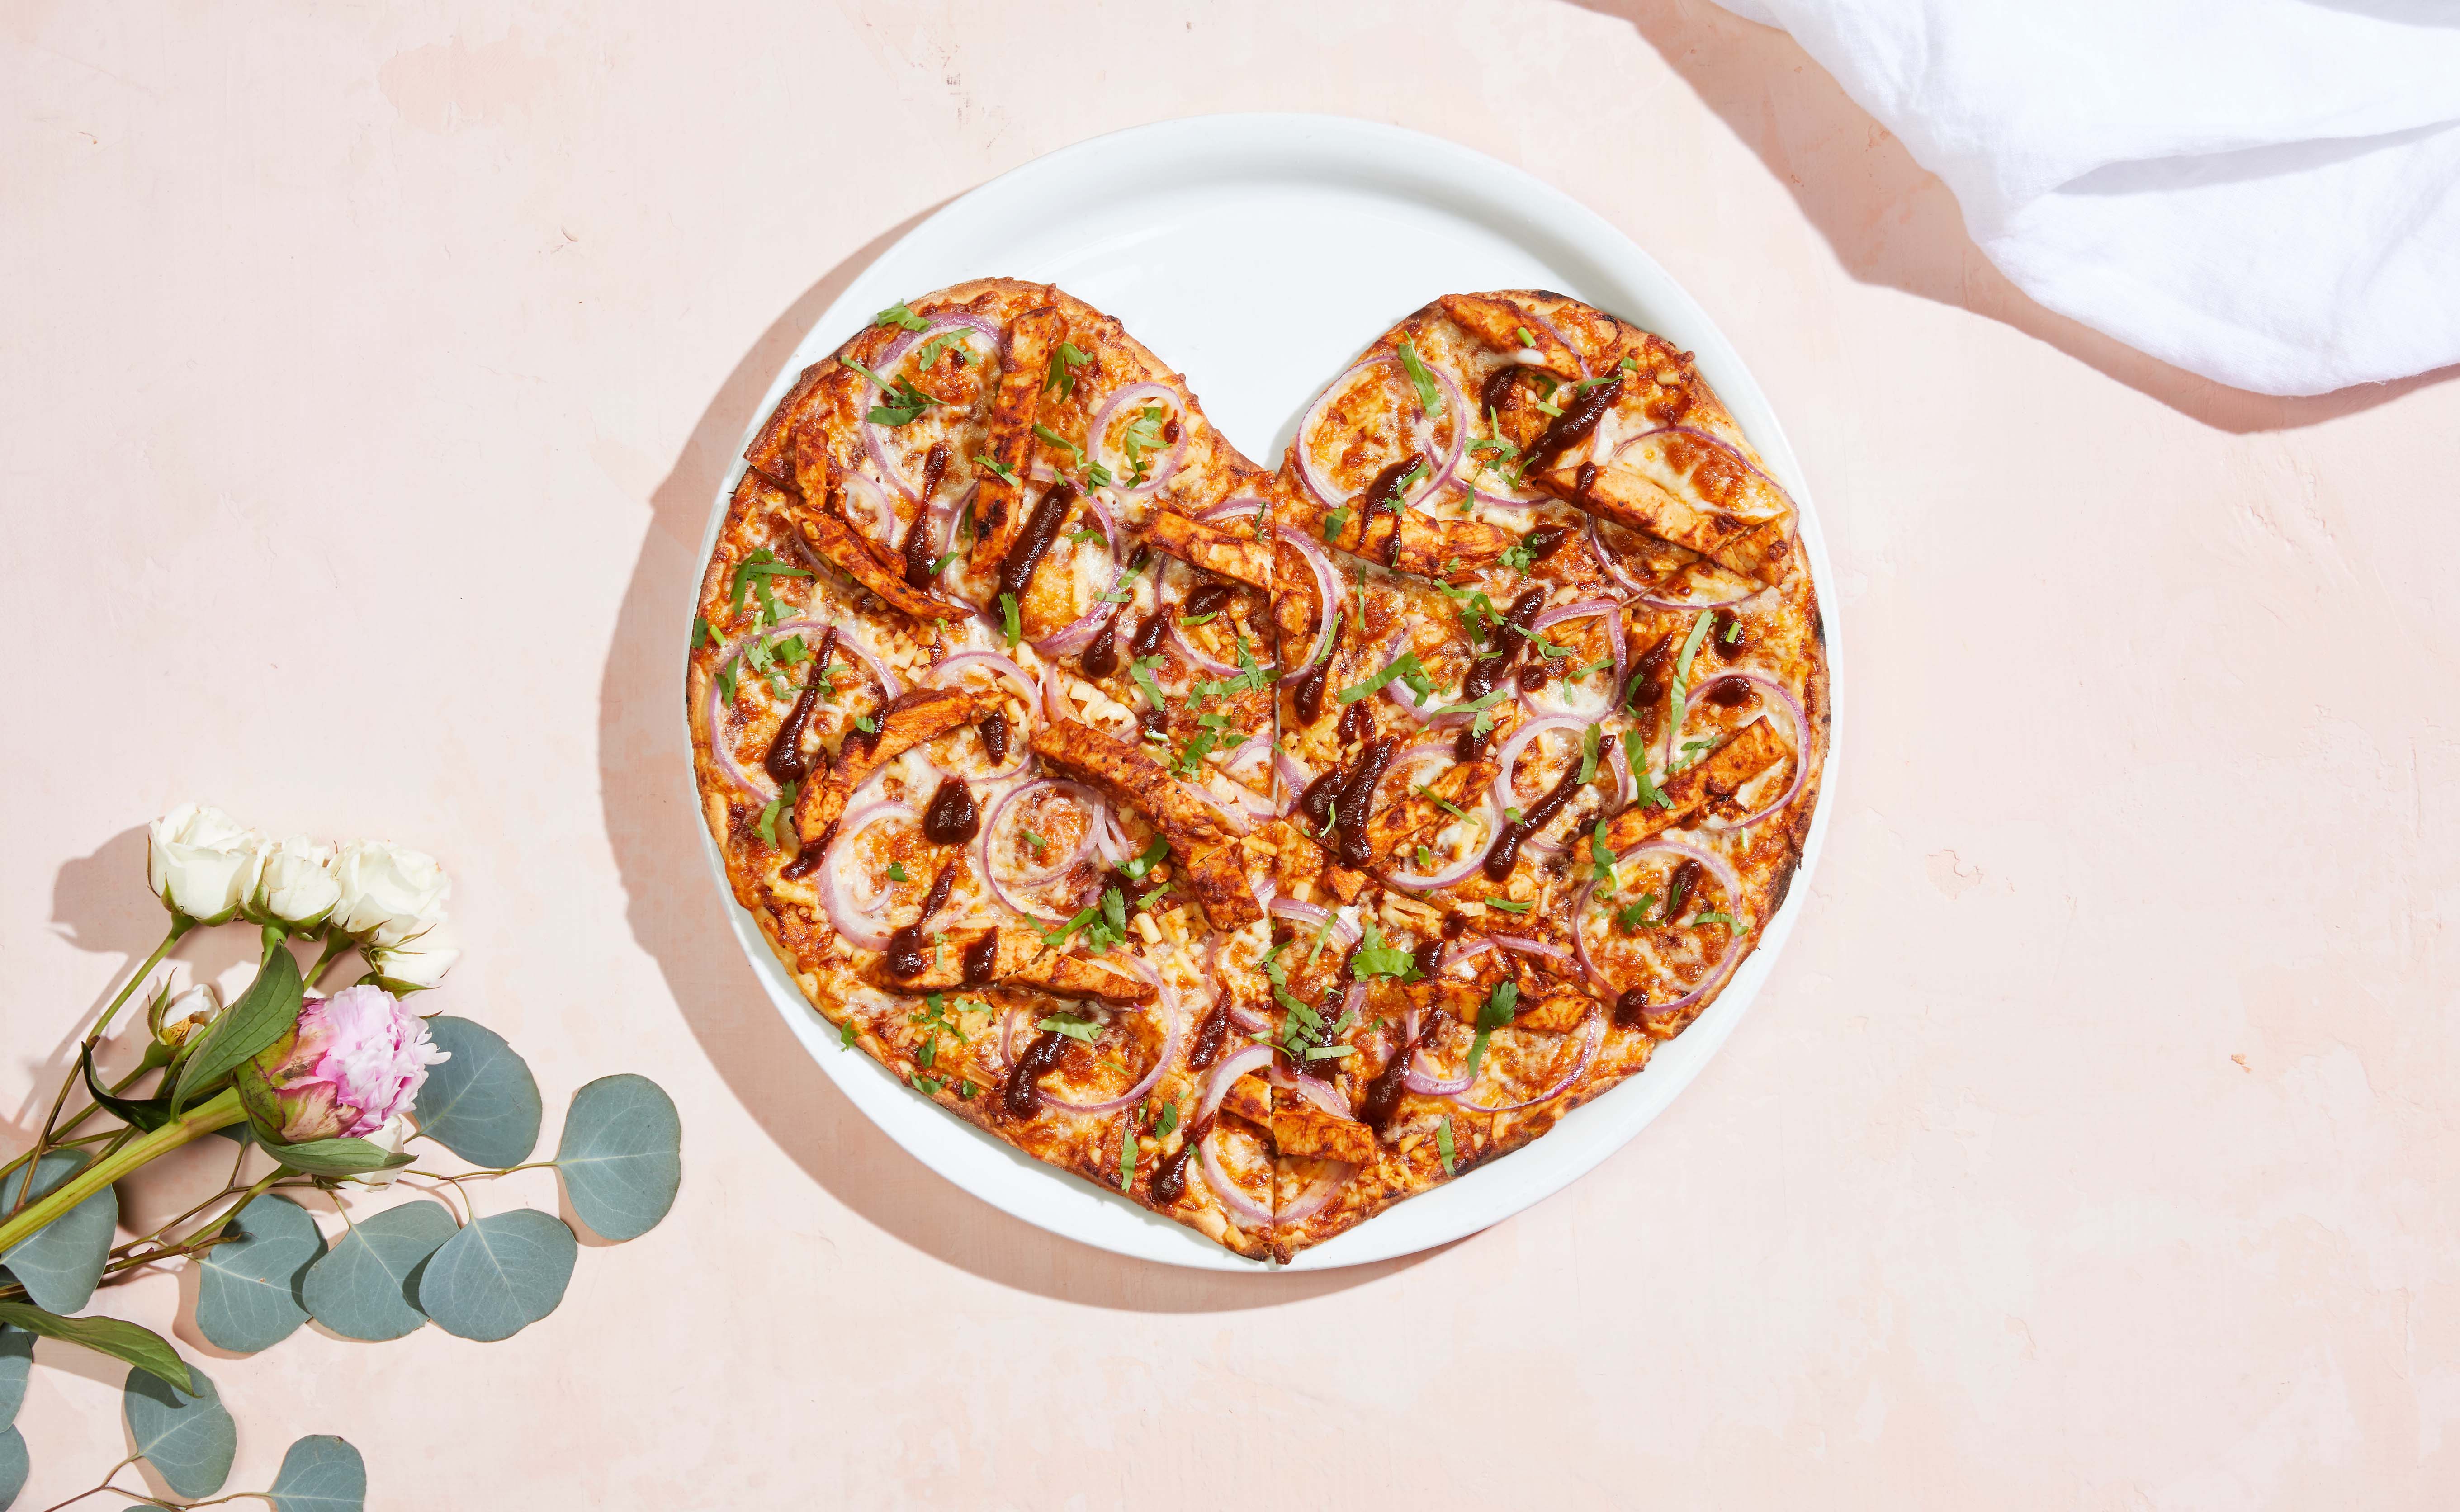 Sweet Deal for Two from California Pizza Kitchen